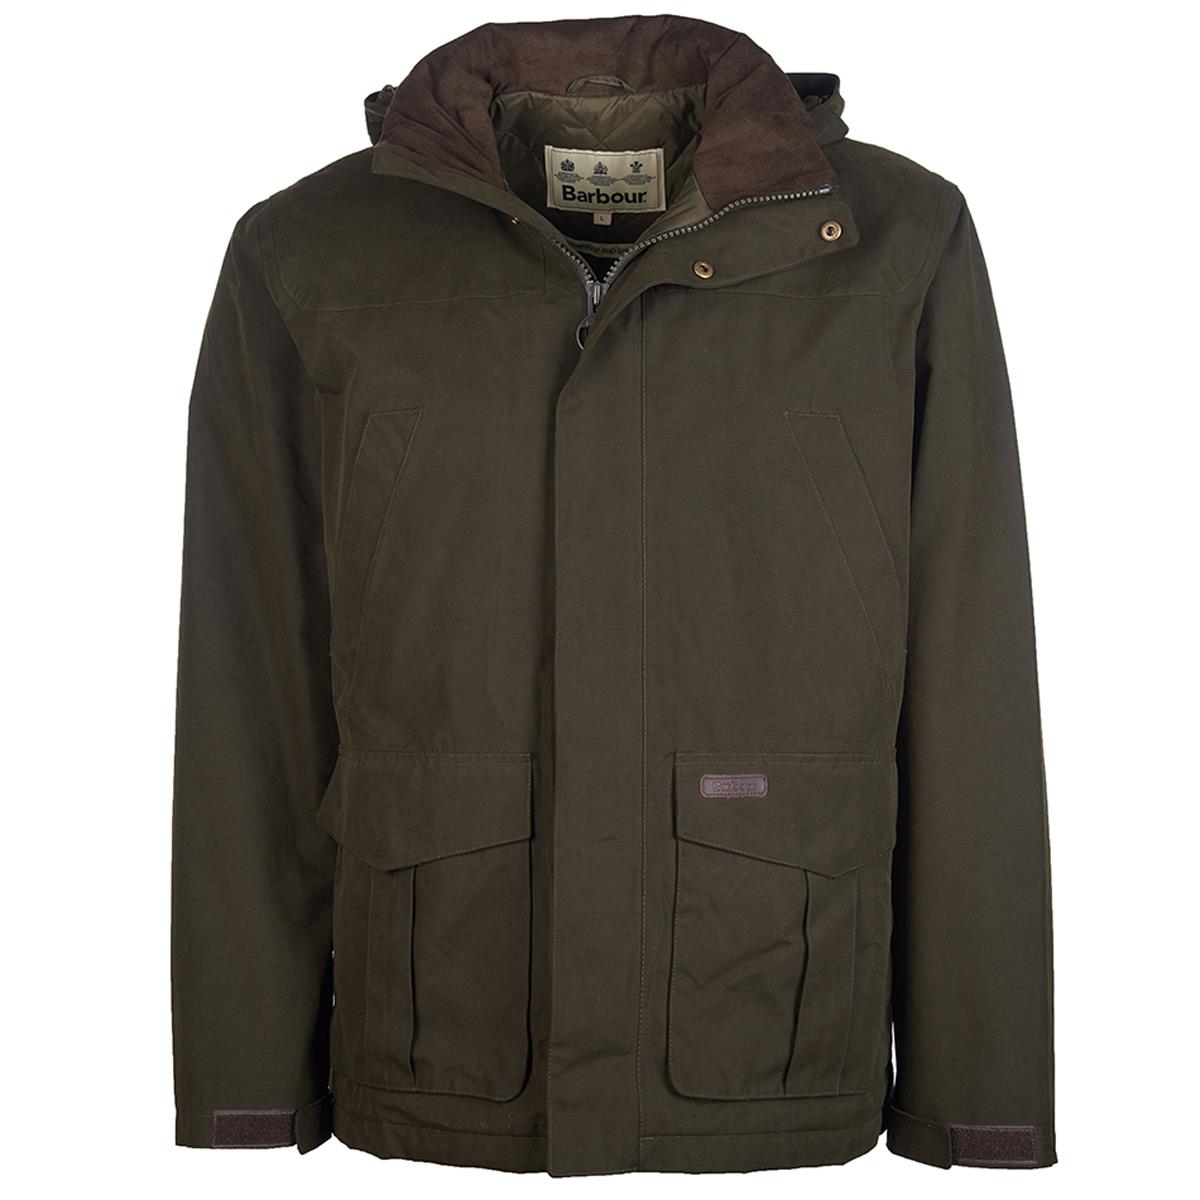 What is the Barbour Brockstone Jacket, and what does it offer?